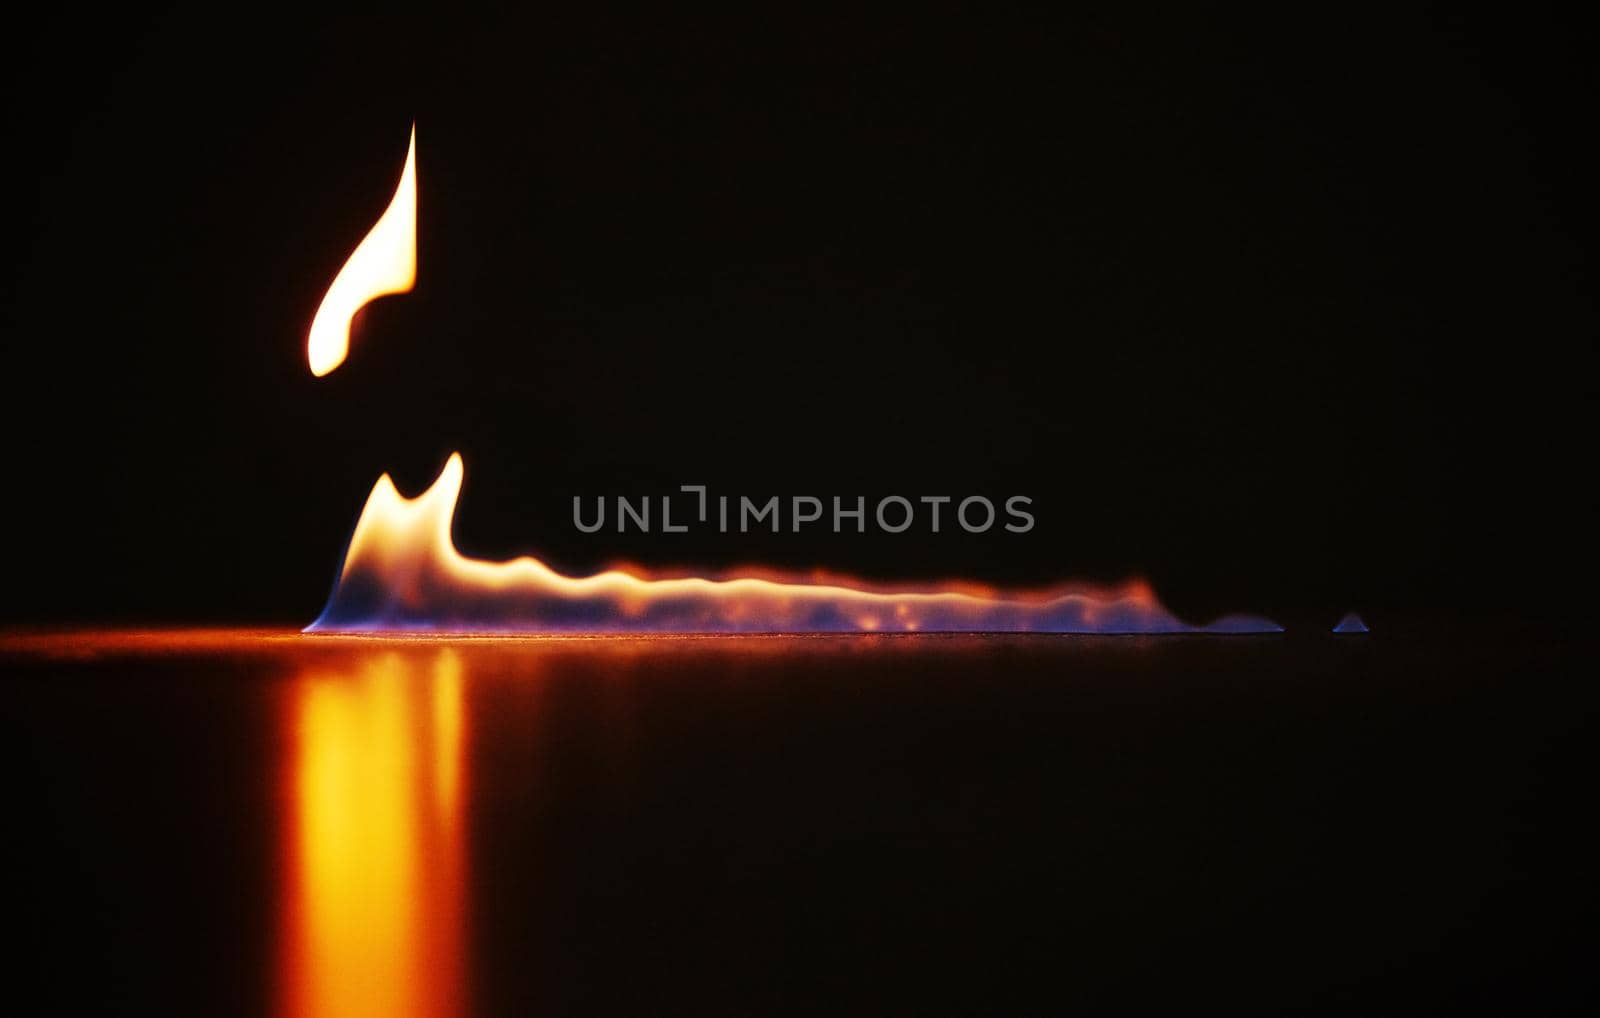 What is beautiful can often destroy. Studio shot of a small flame burning against a black background. by YuriArcurs